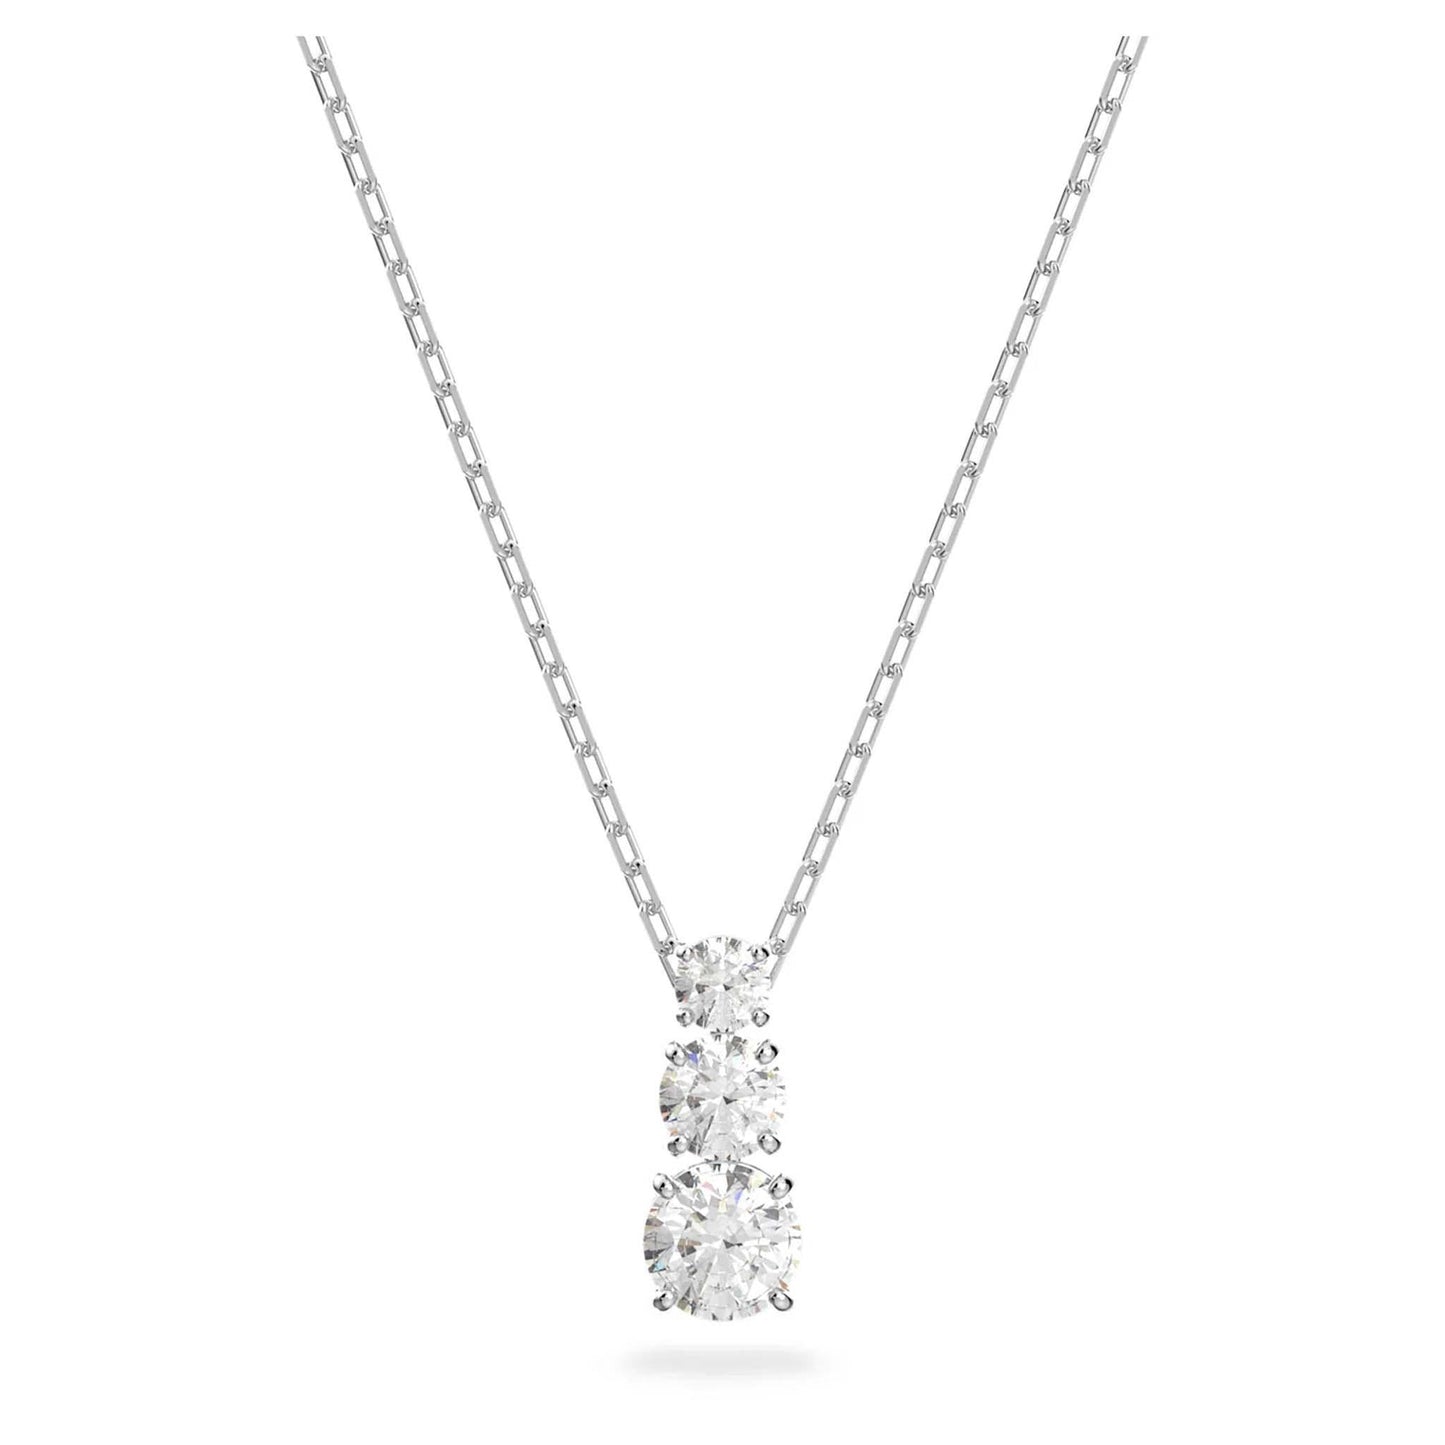 Attract Trilogy pendant - Cosmos Boutique New Jersey